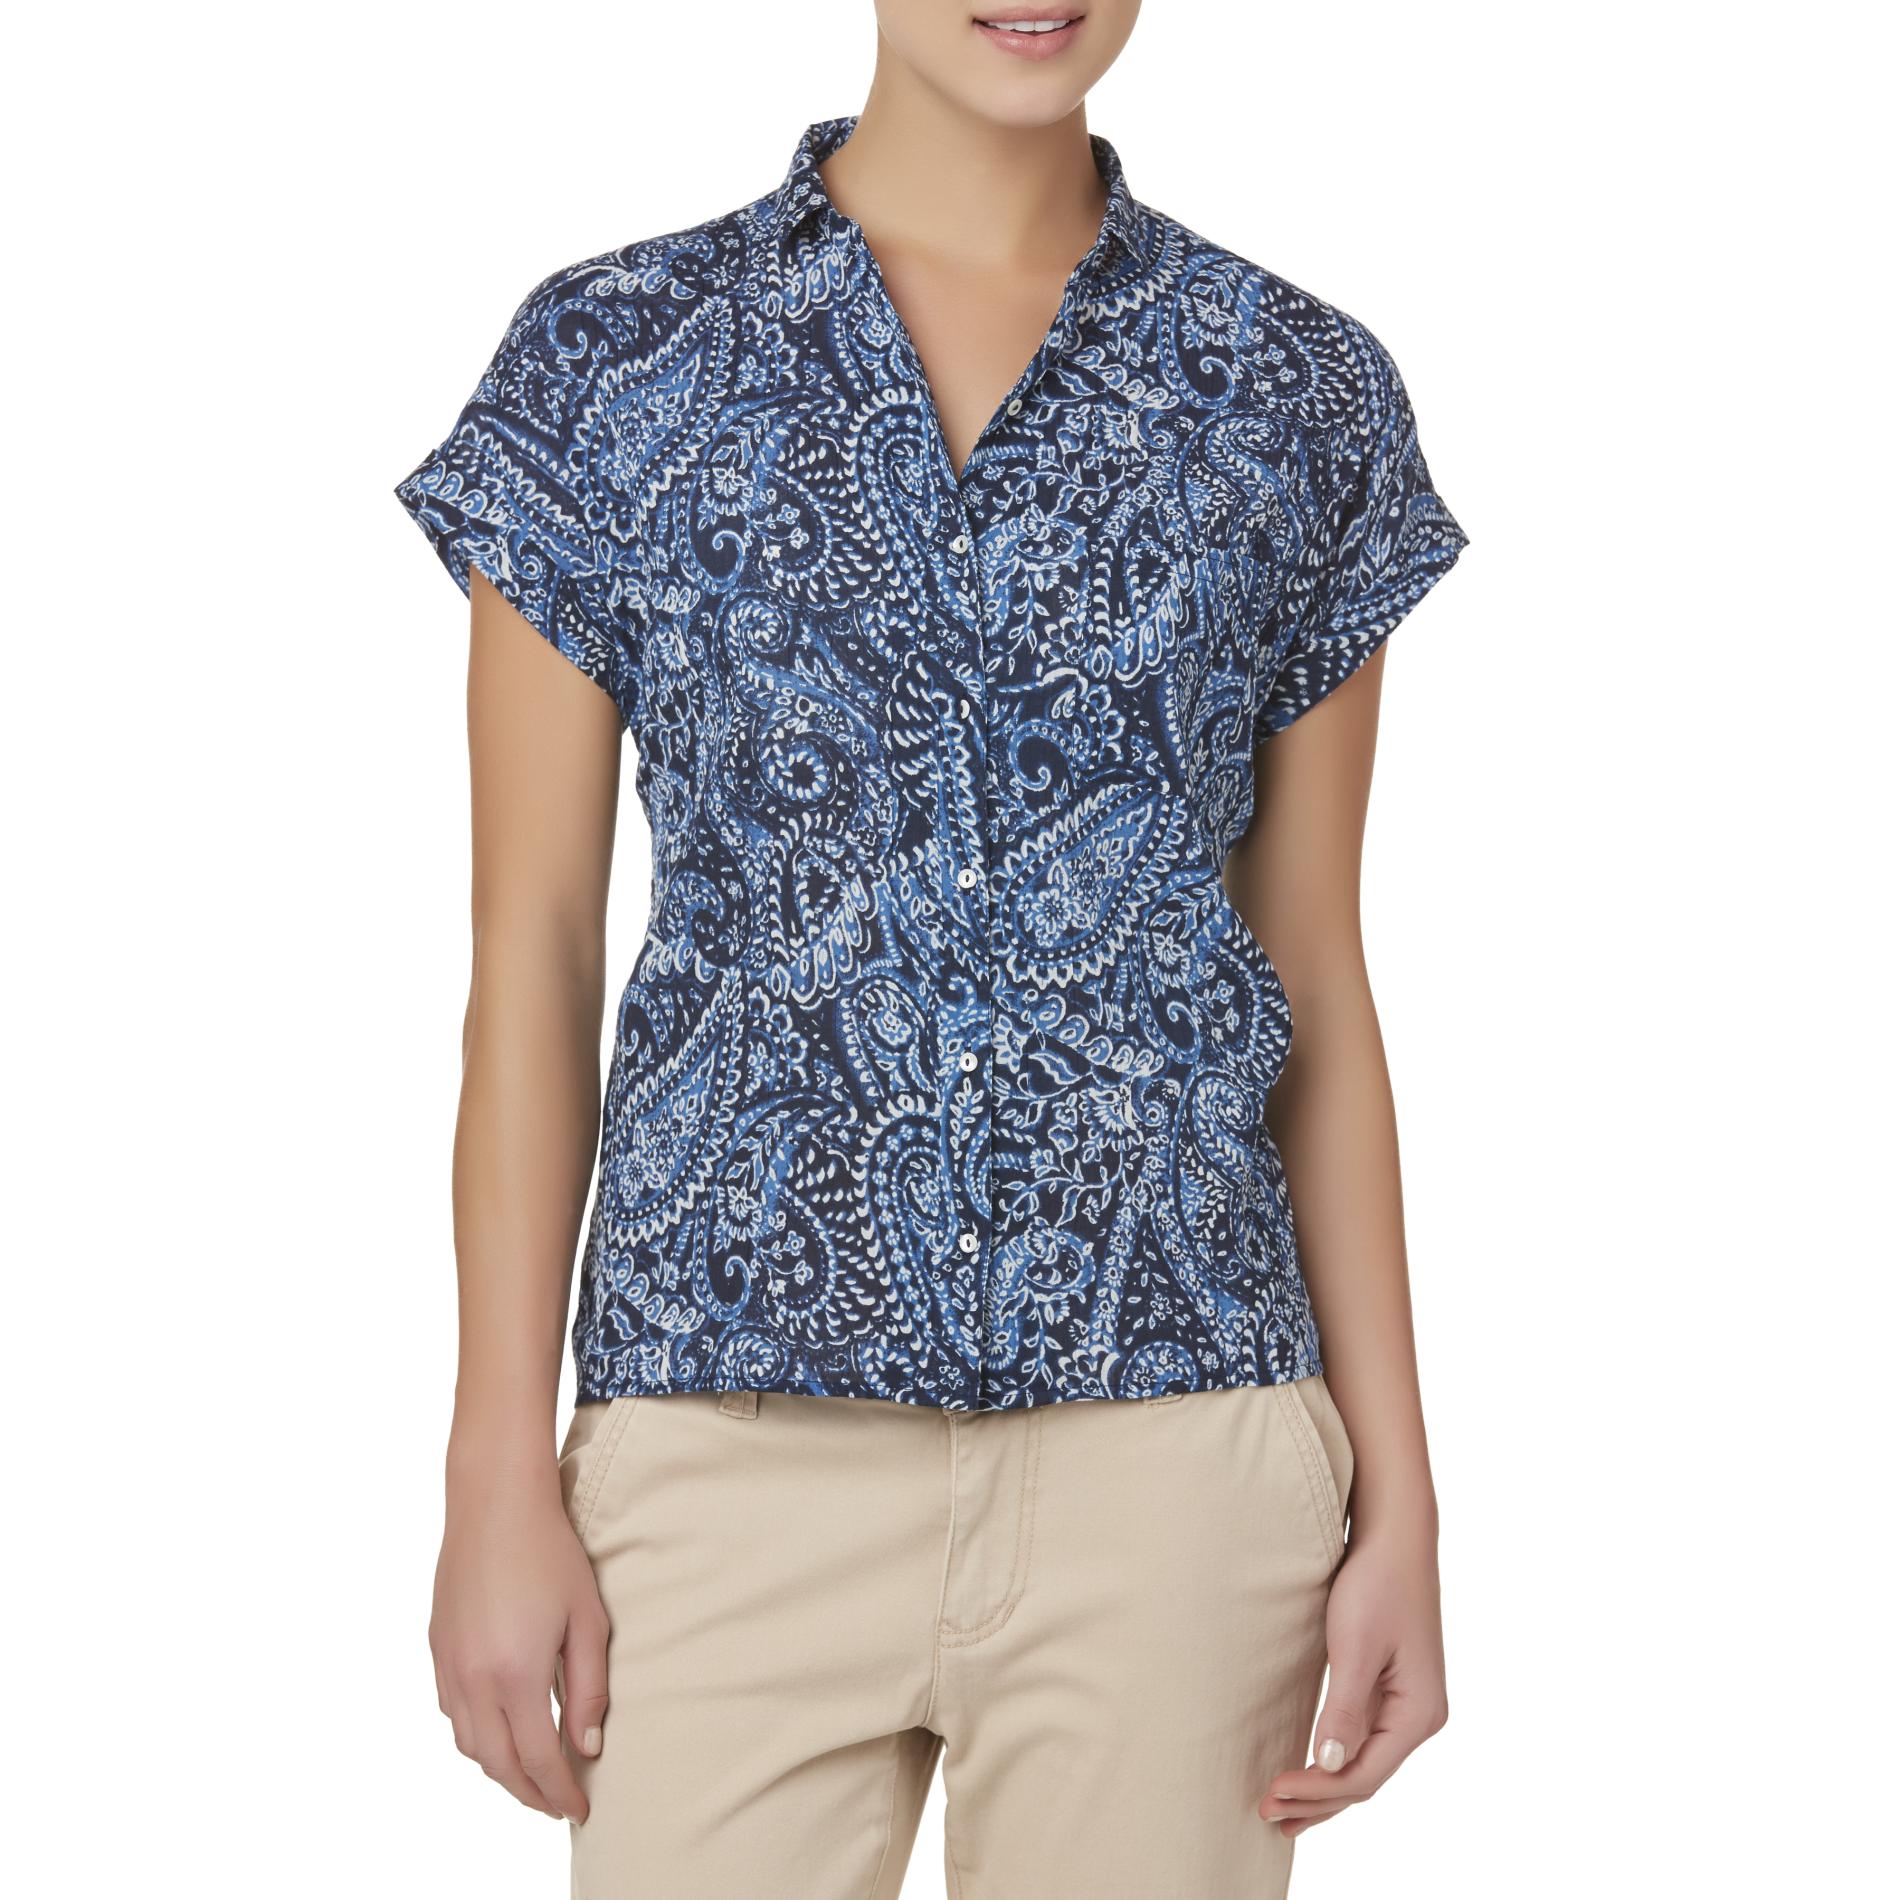 Simply Styled Women's Camp Shirt - Paisley